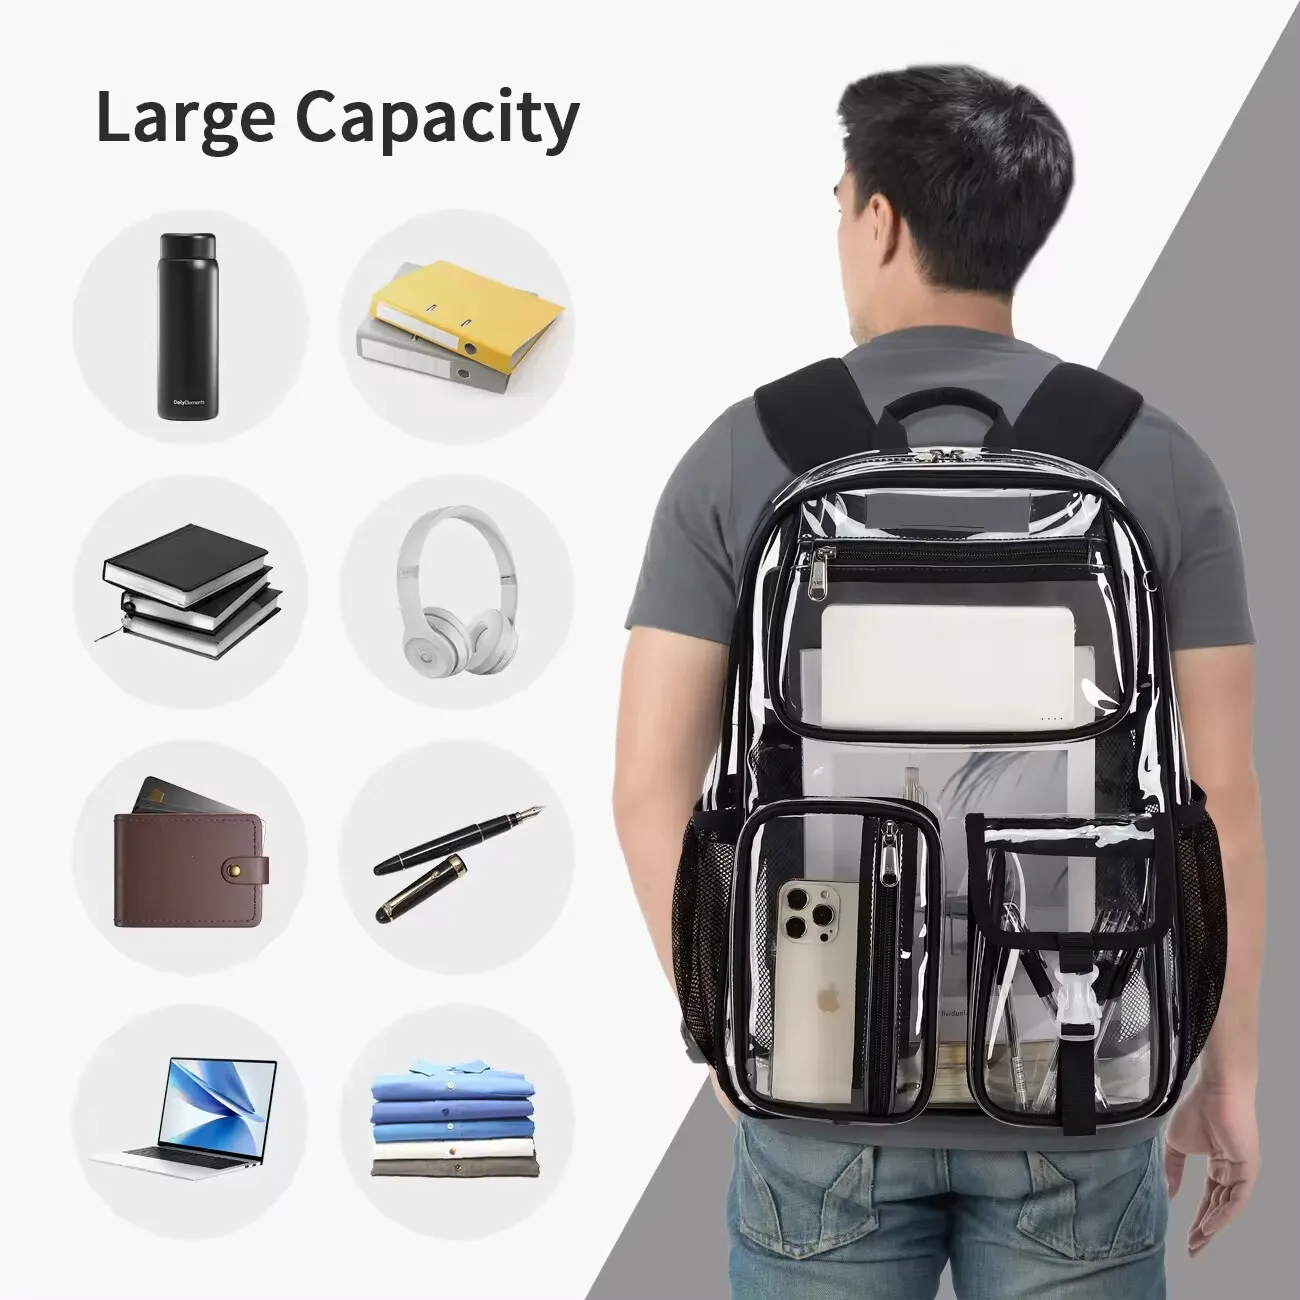 

TPU Transparent Jelly Bag for Middle School Students High Capacity Backpack